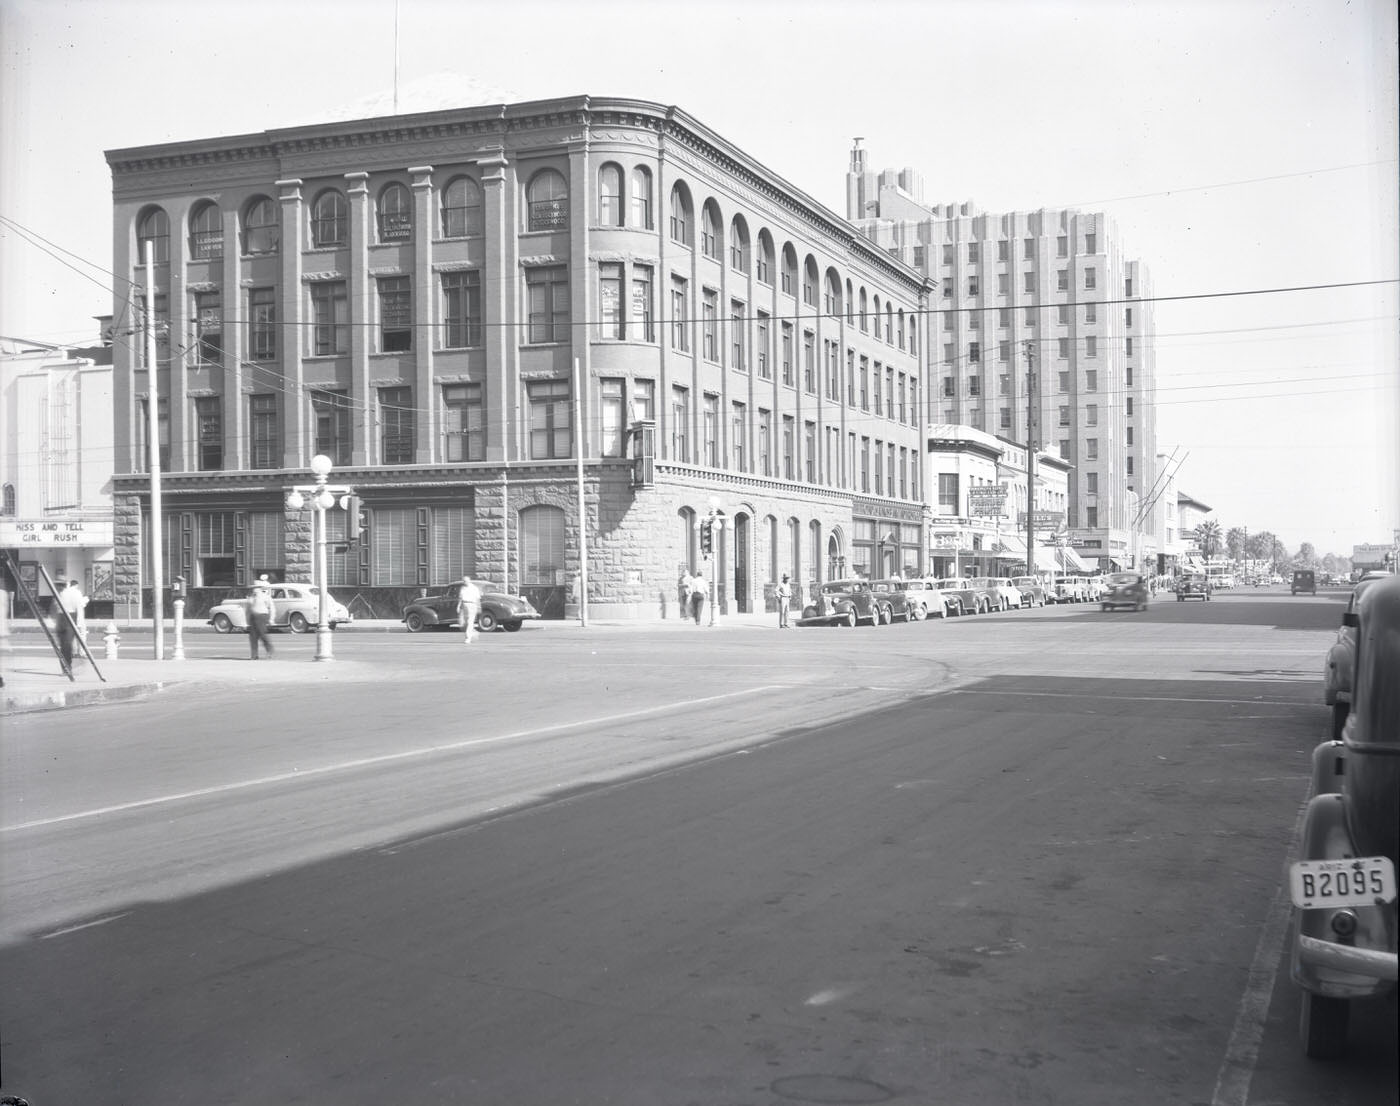 Fleming Building Exterior, 1946. This building was located on the northwest corner of 1st Ave. and Washington and housed the Phoenix National Bank.